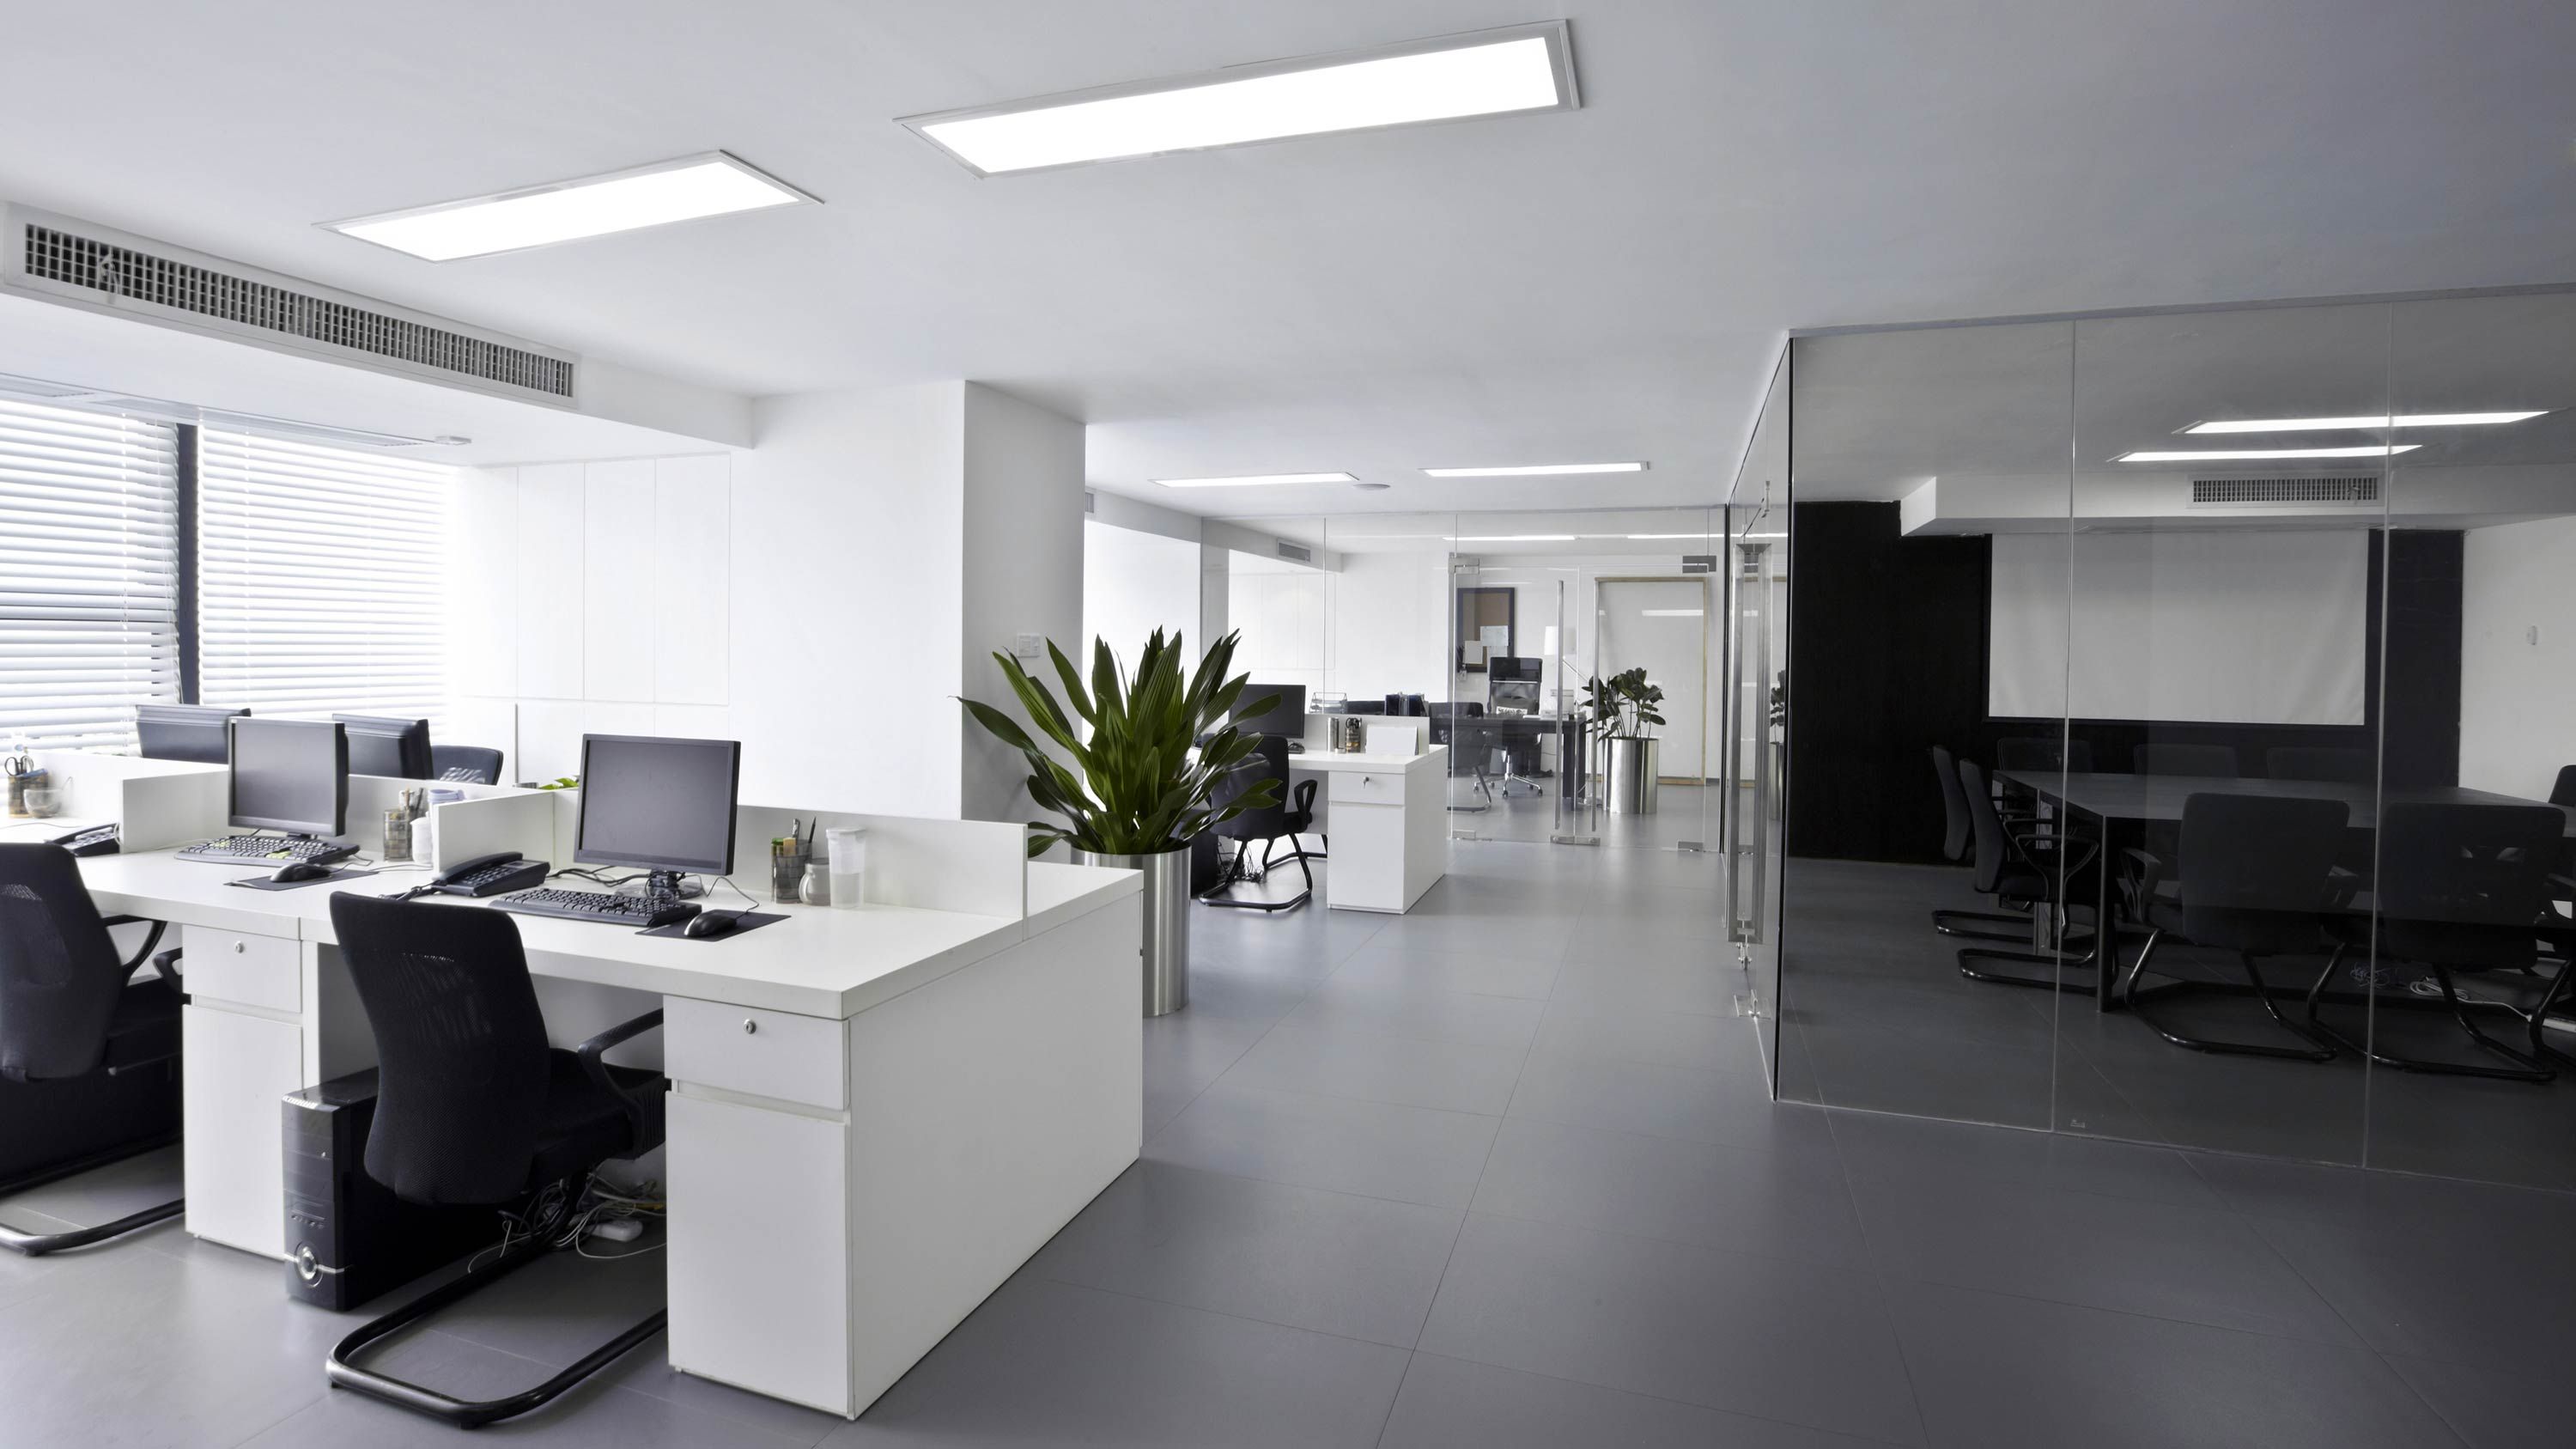 office with white desks, hvac control, lighting on ceiling